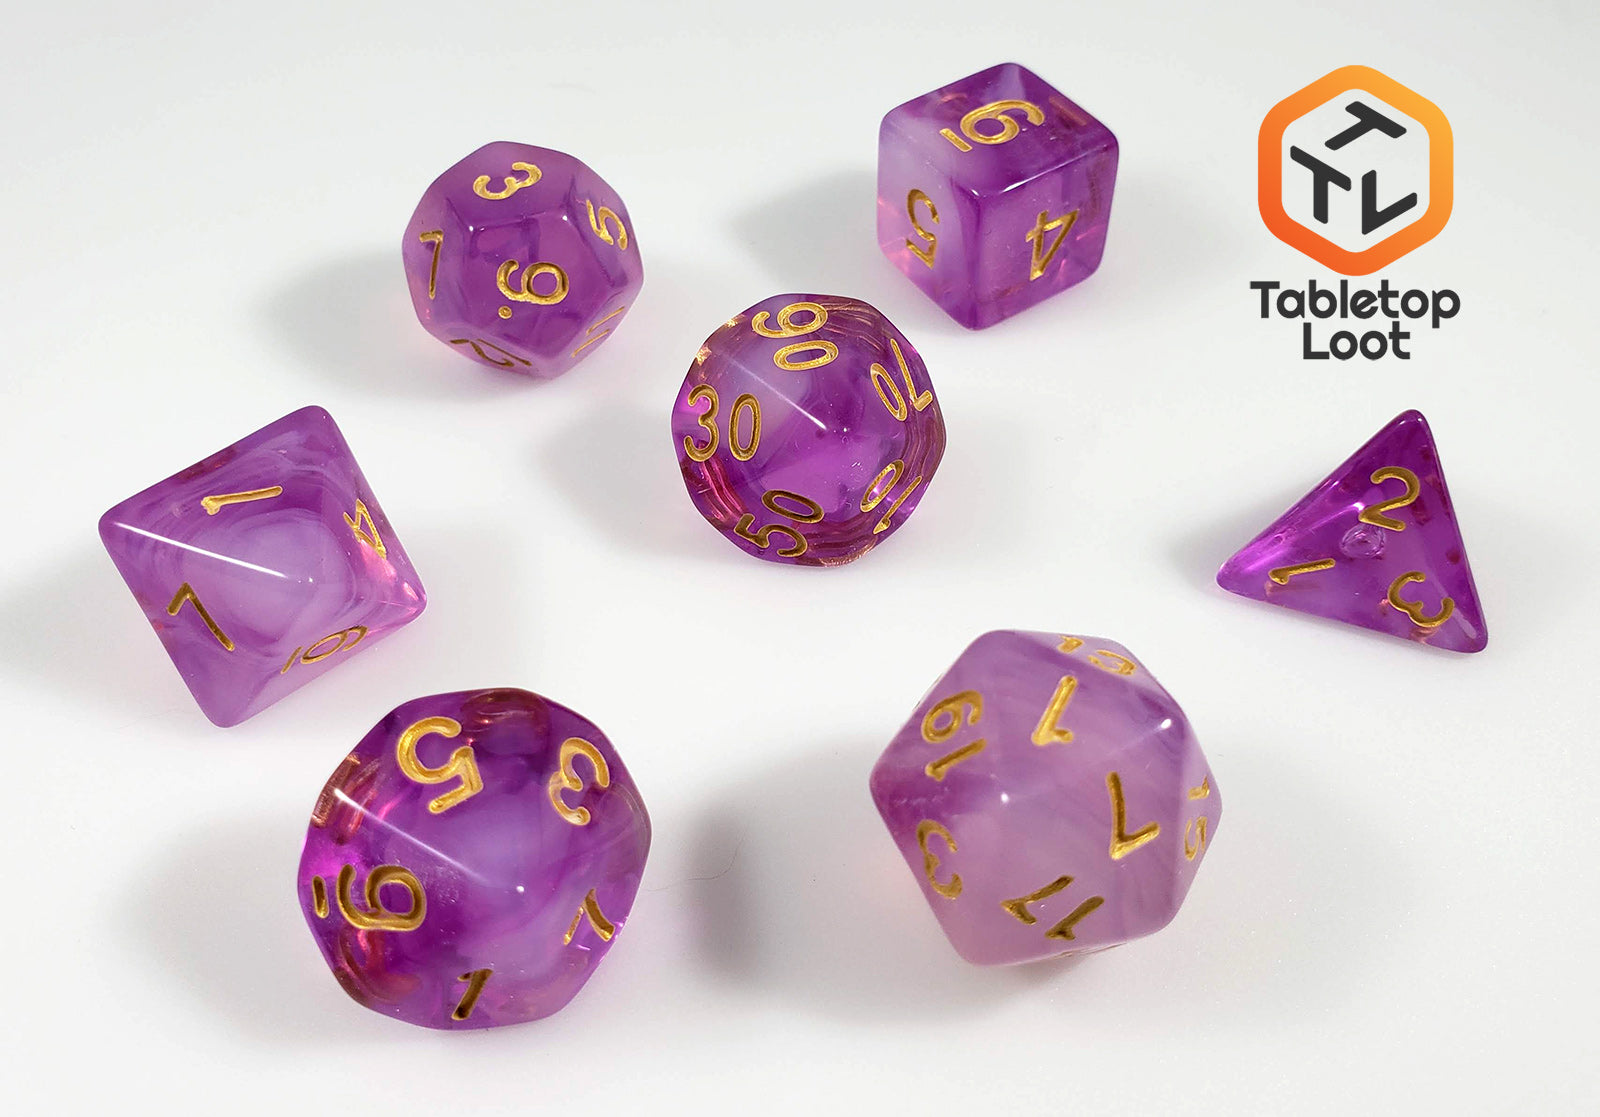 The Amethyst Geode 7 piece dice set from Tabletop Loot with swirls of purple and white resin and gold numbering.